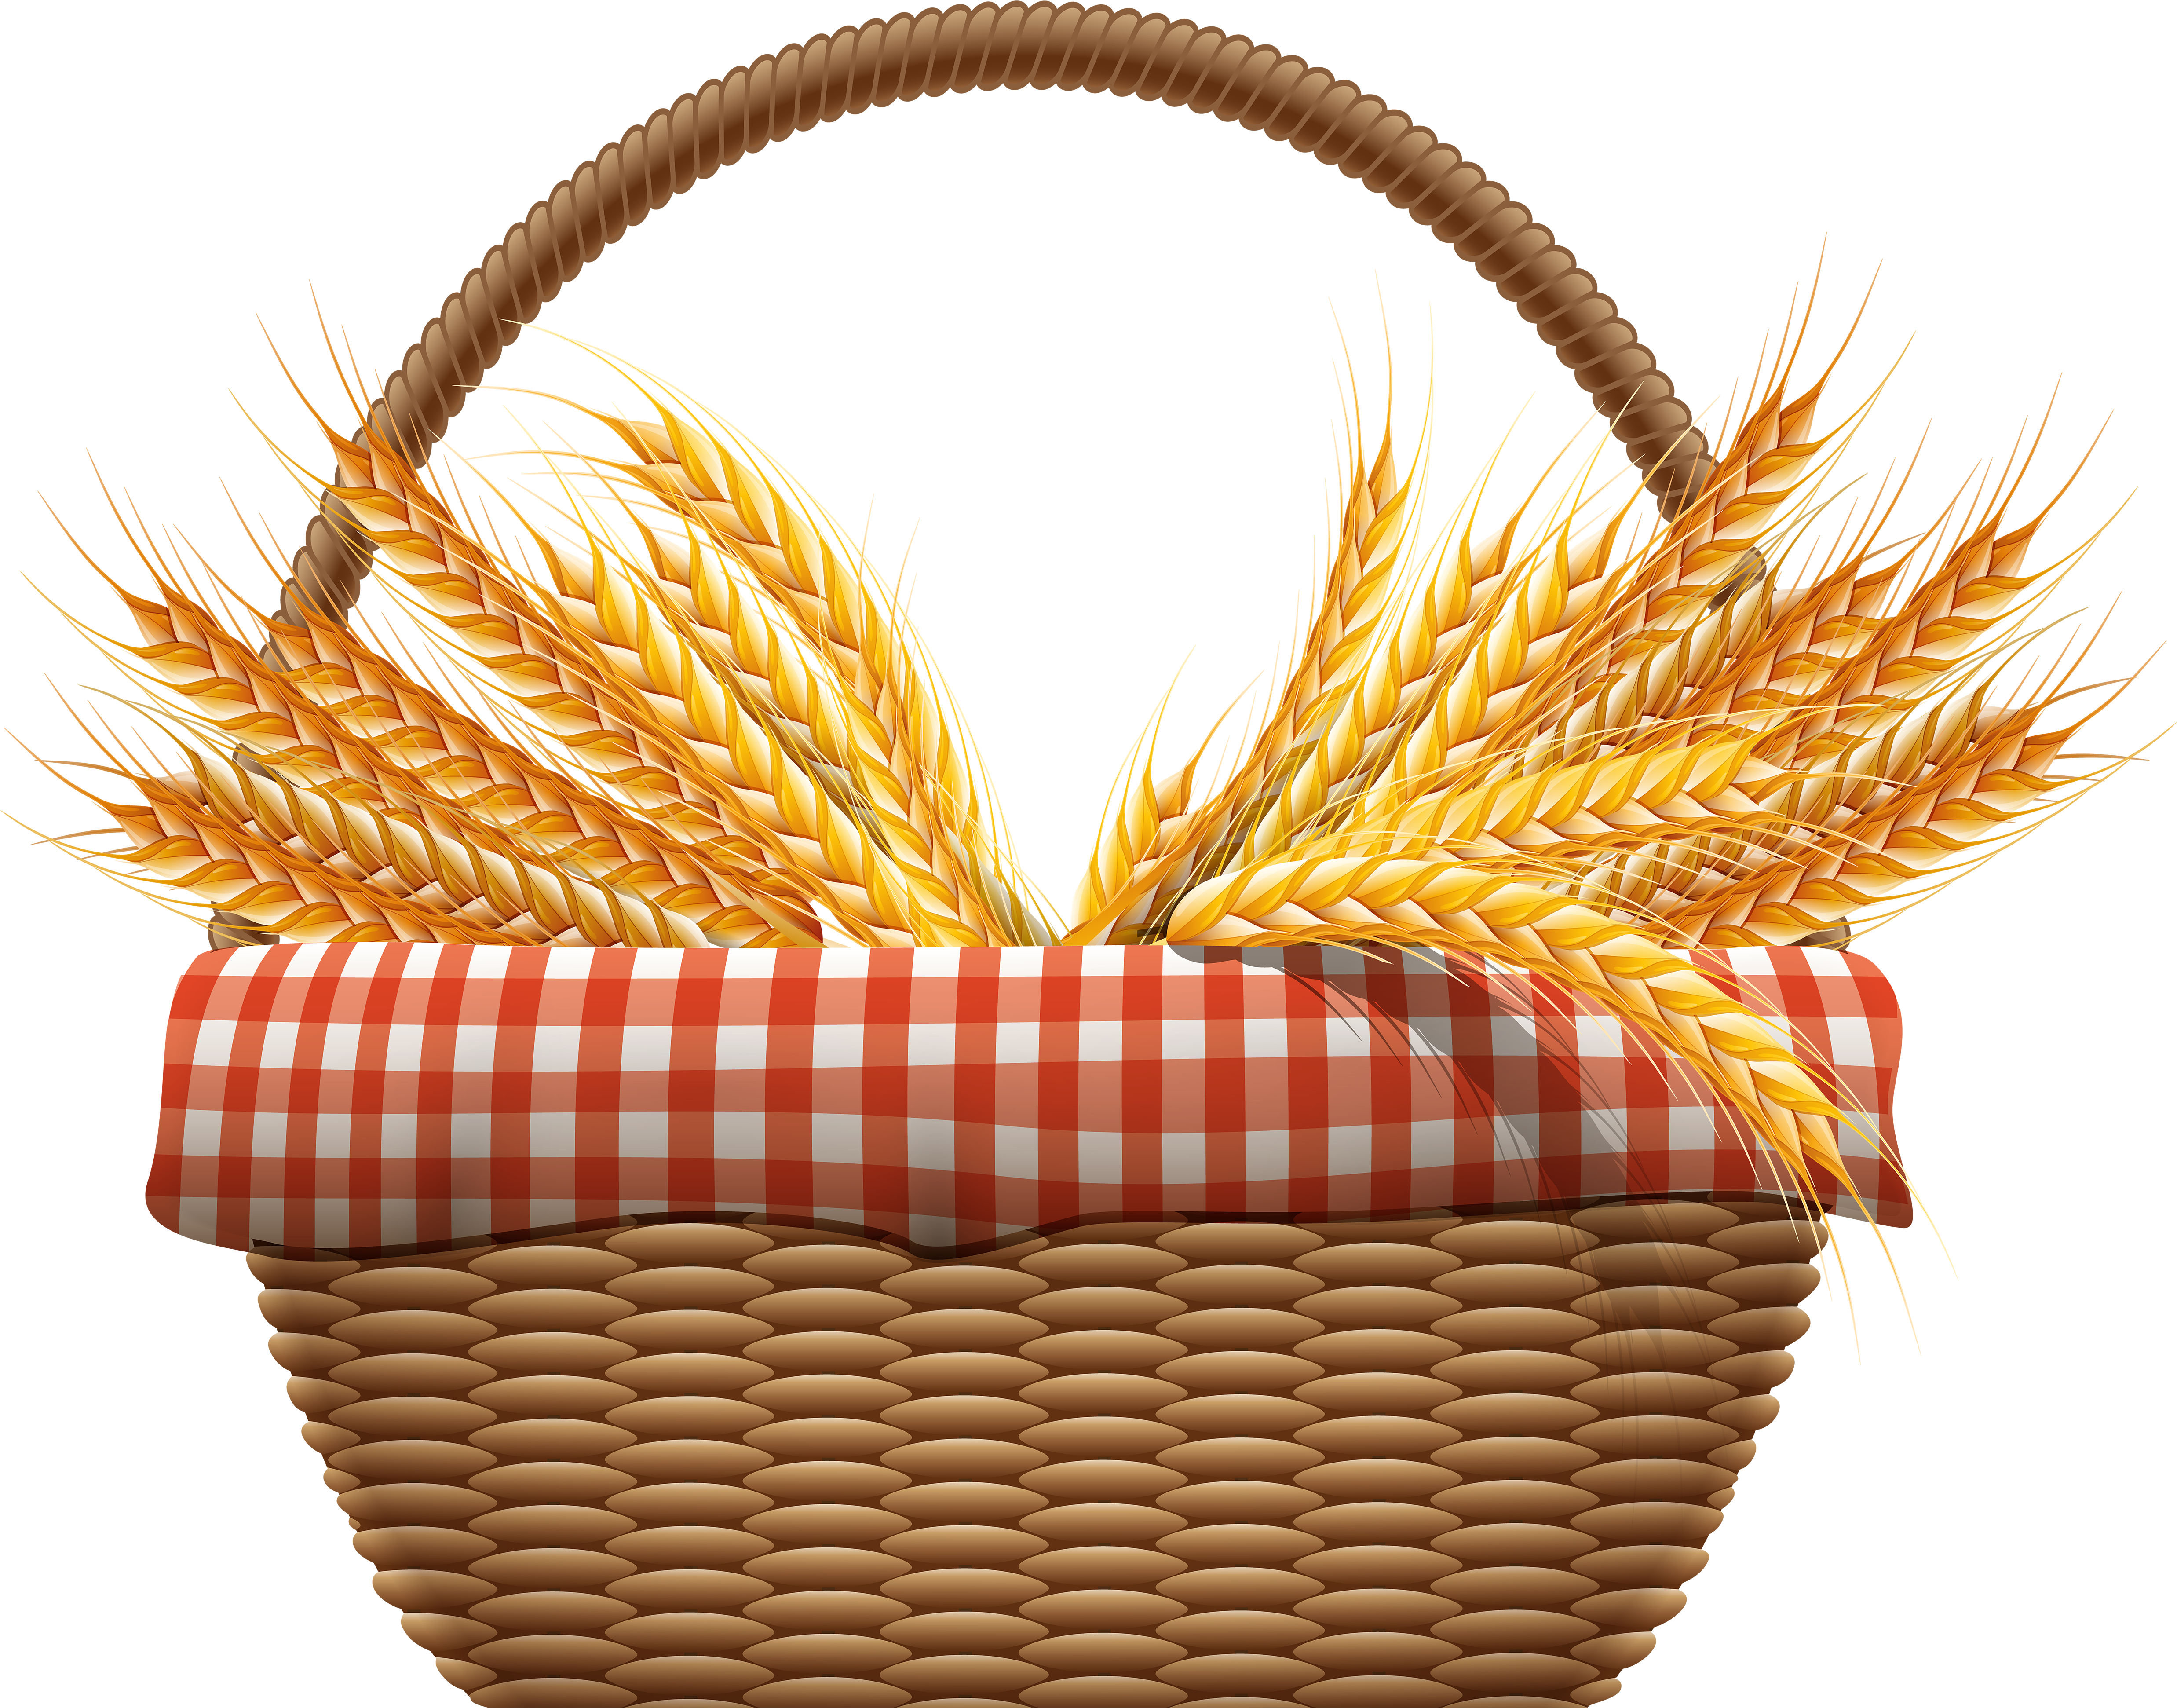 A Basket With Wheat Ears And A Red Checkered Cloth